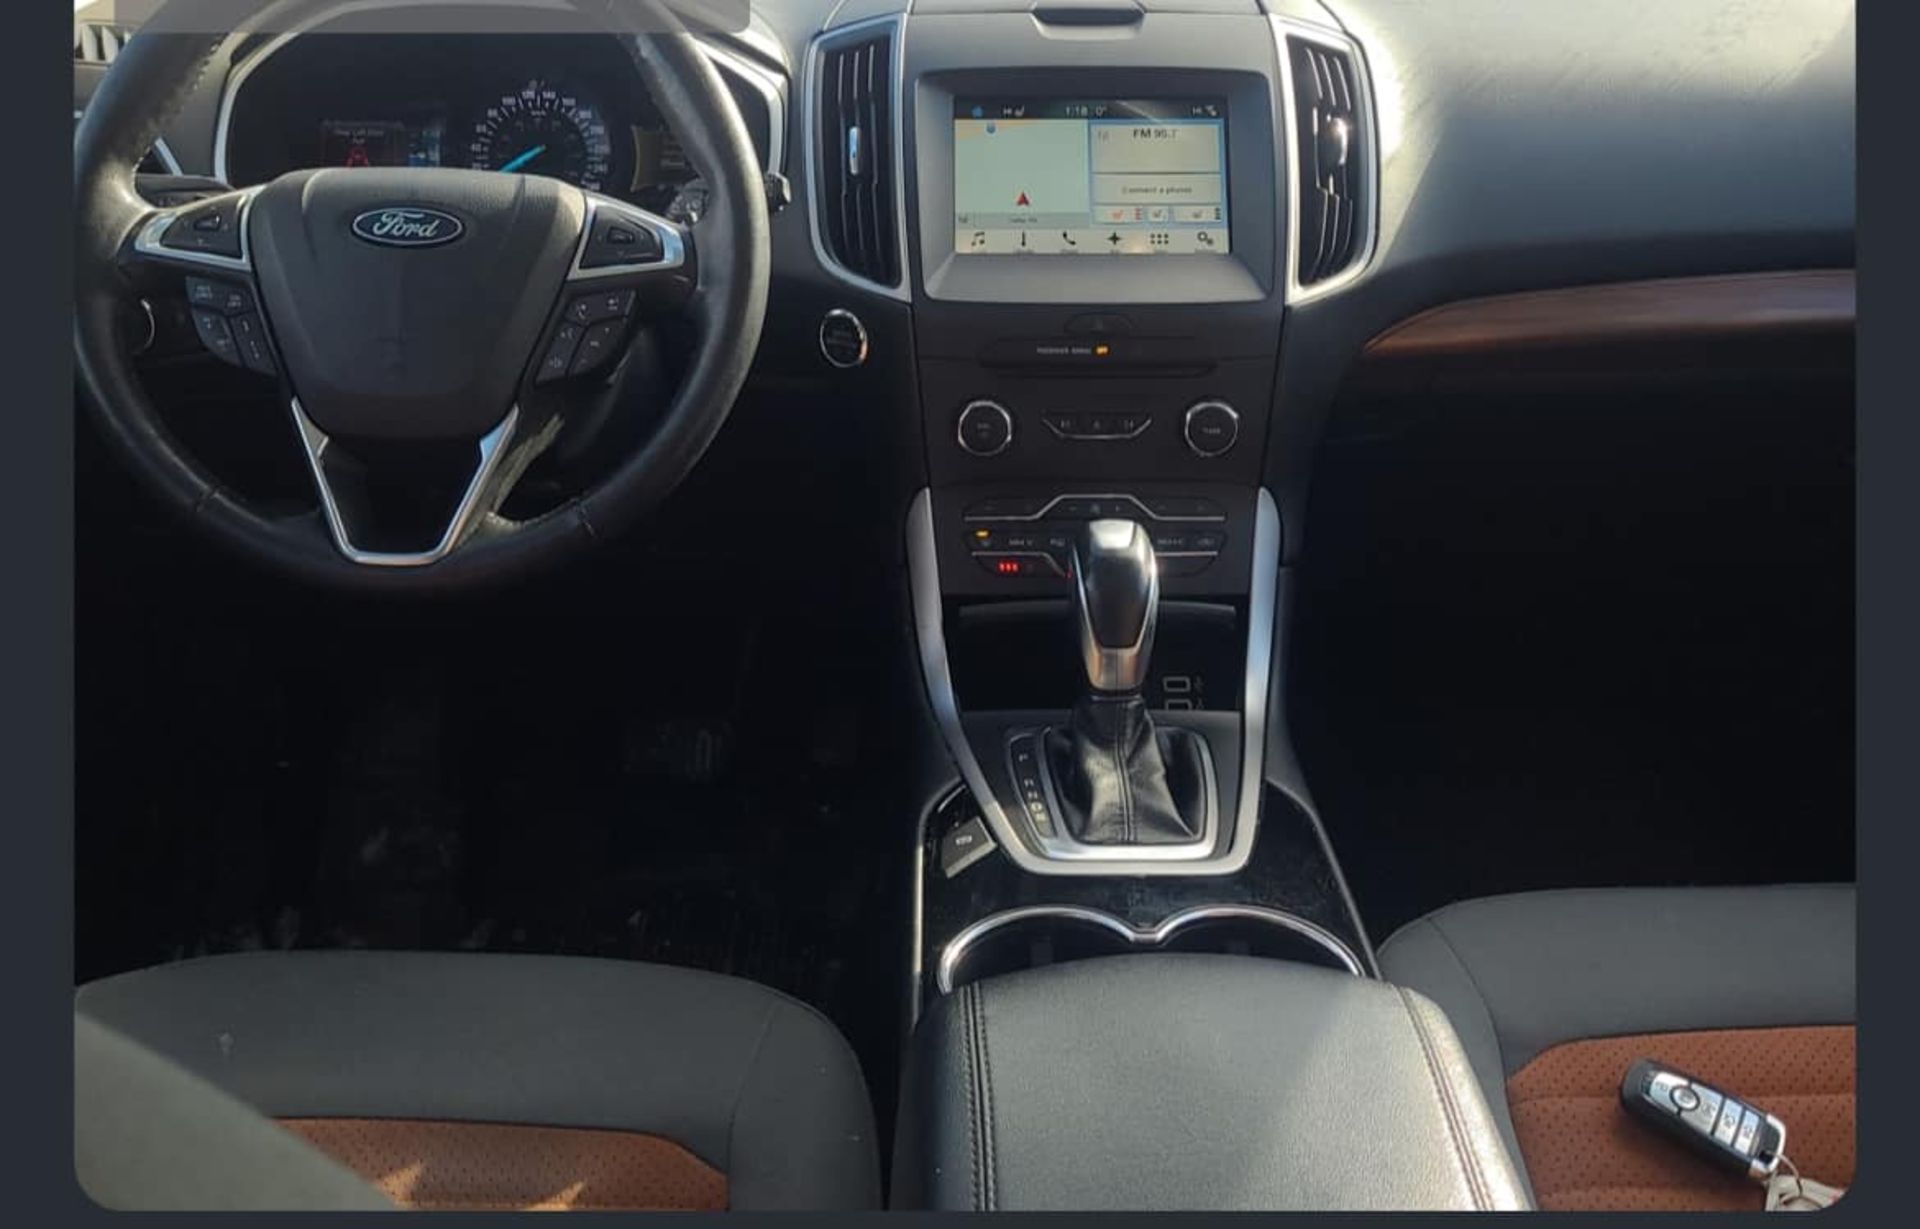 2018 FORD EDGE SEL - Image 12 of 13